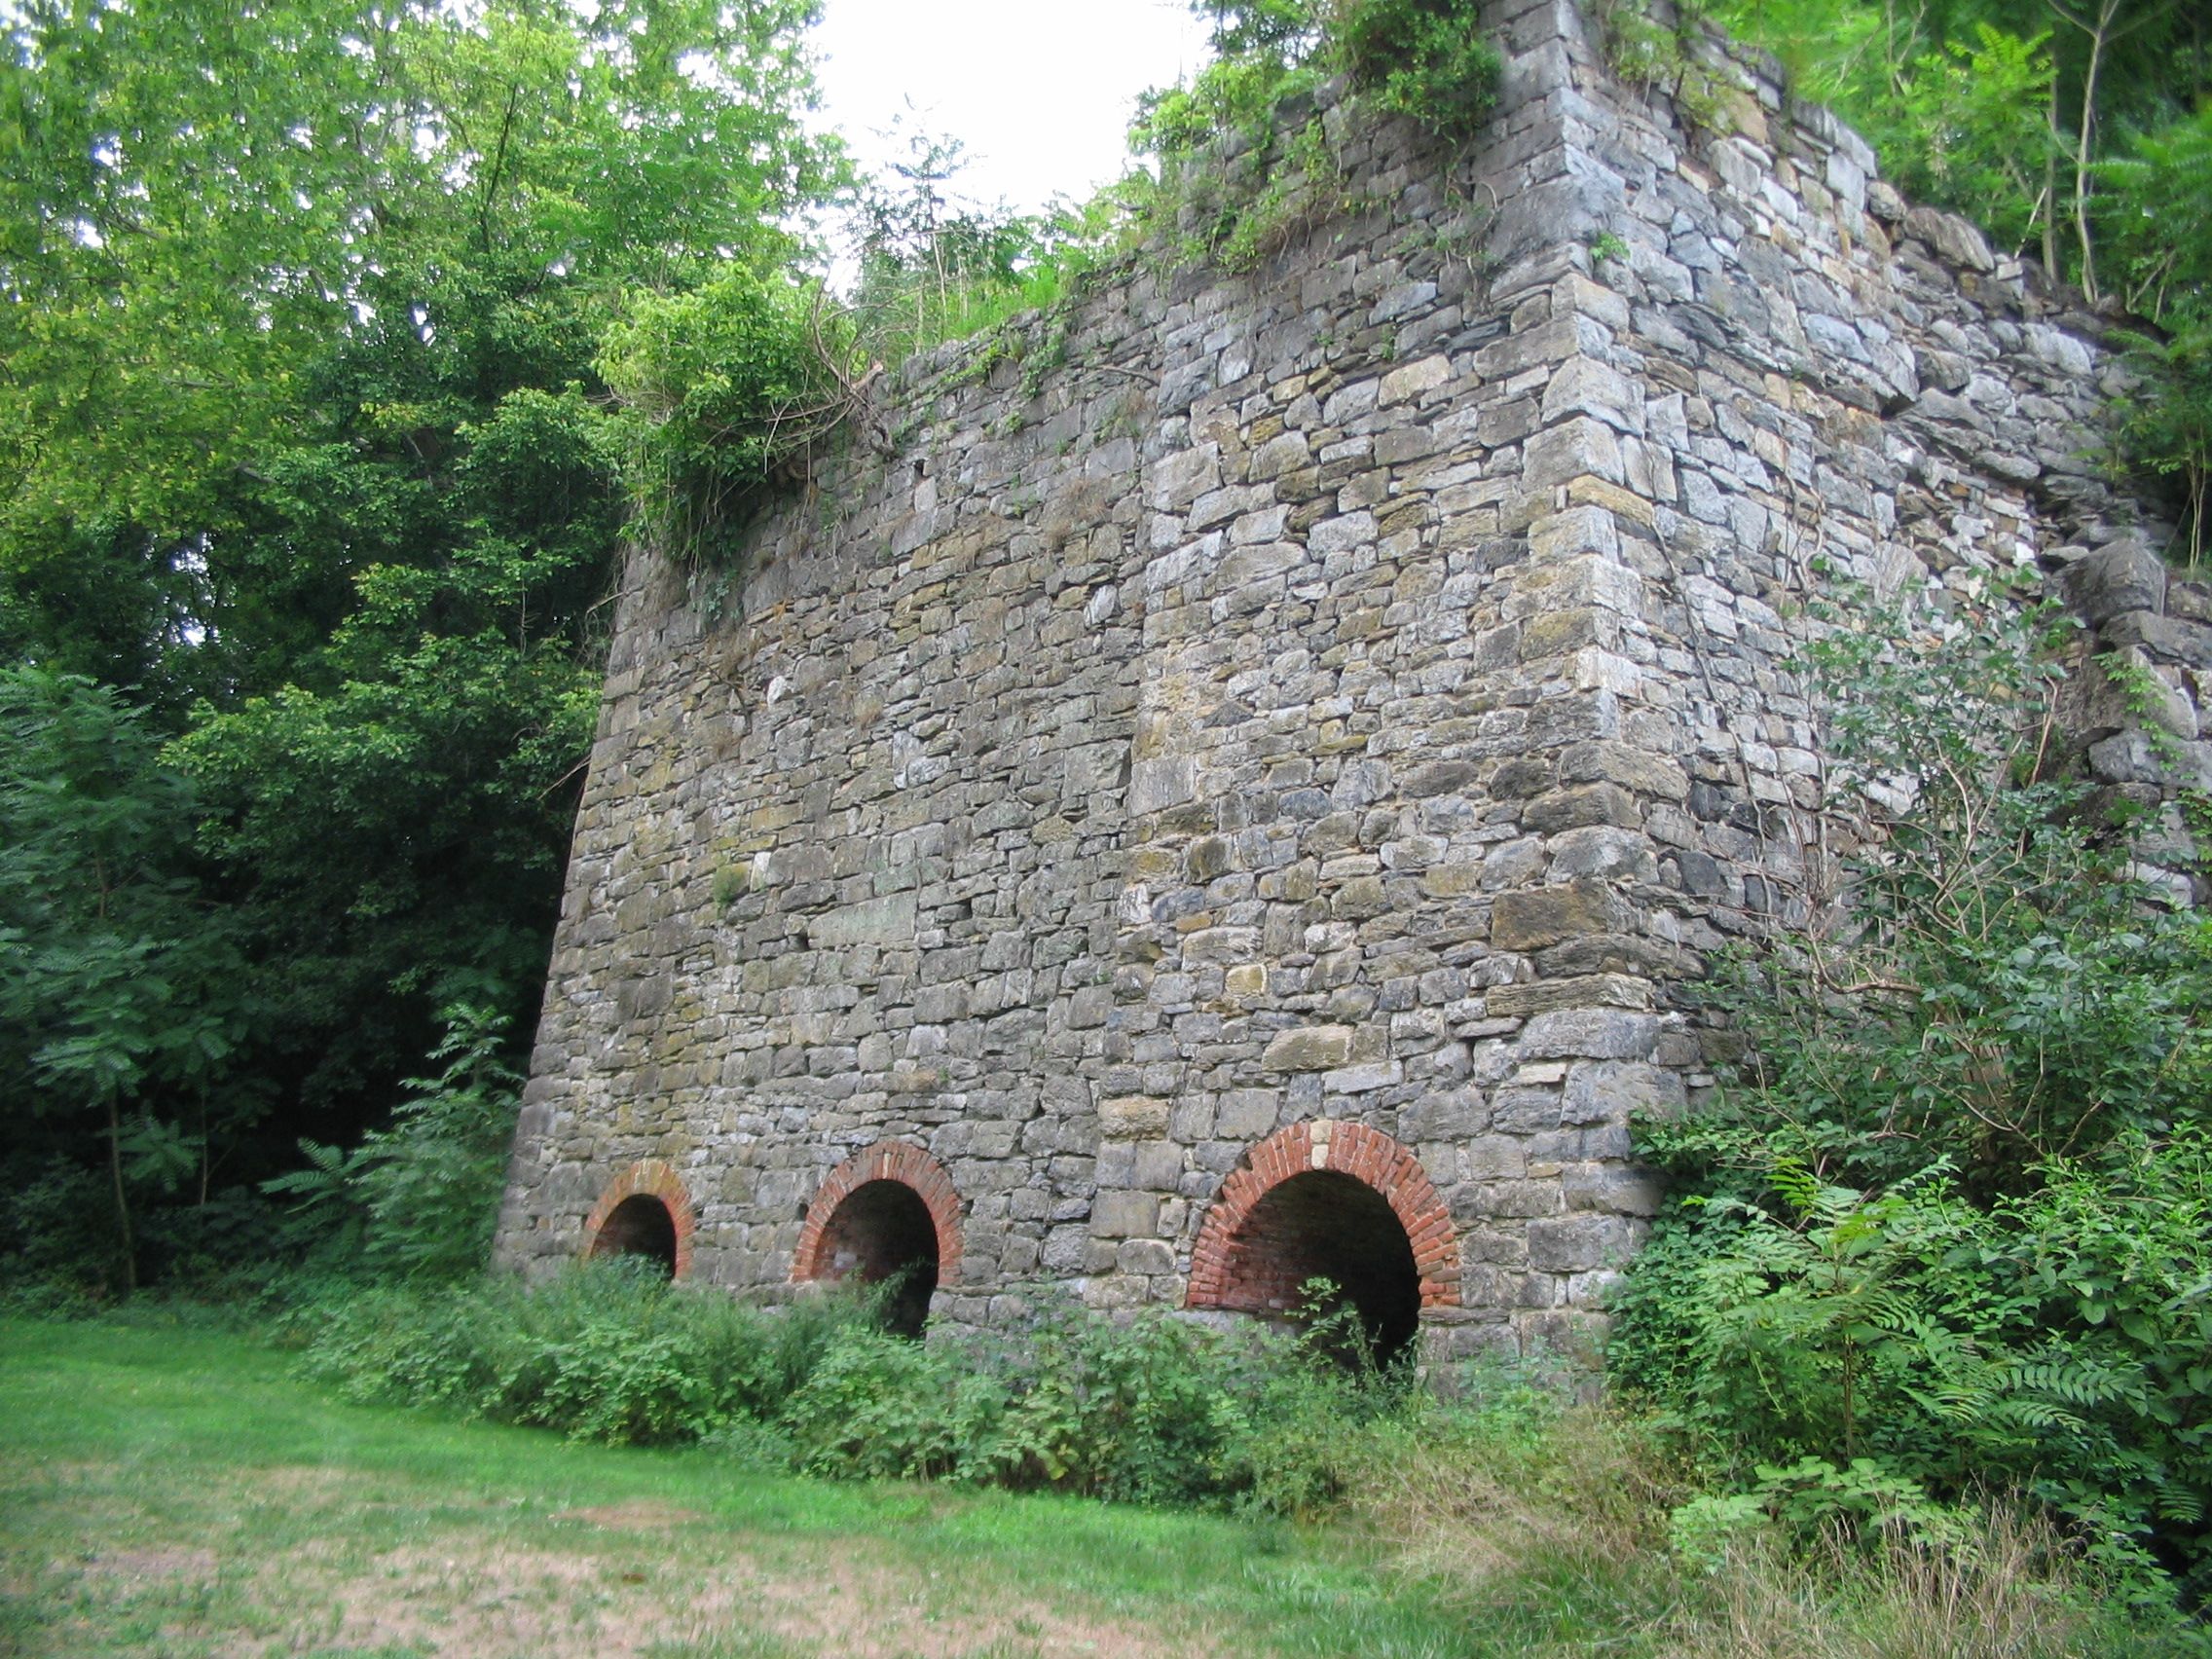 Remains of the Antietam Furnace